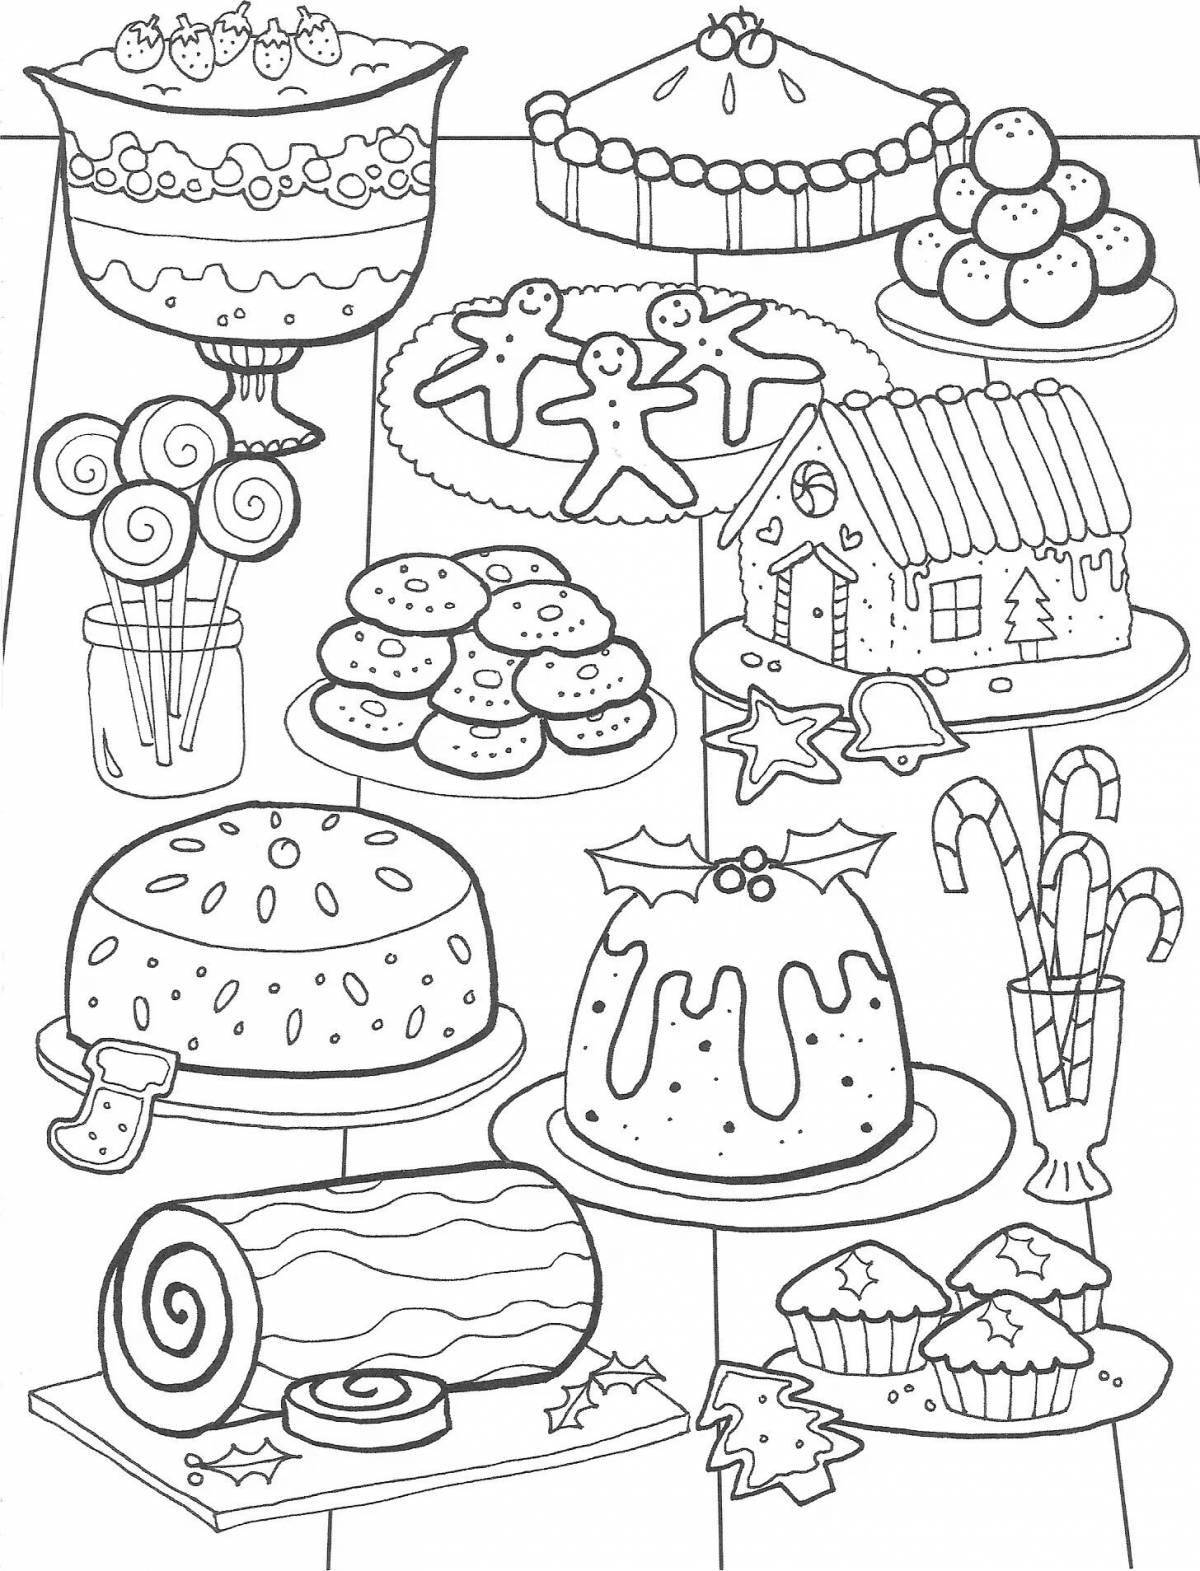 Amazing sweets coloring page